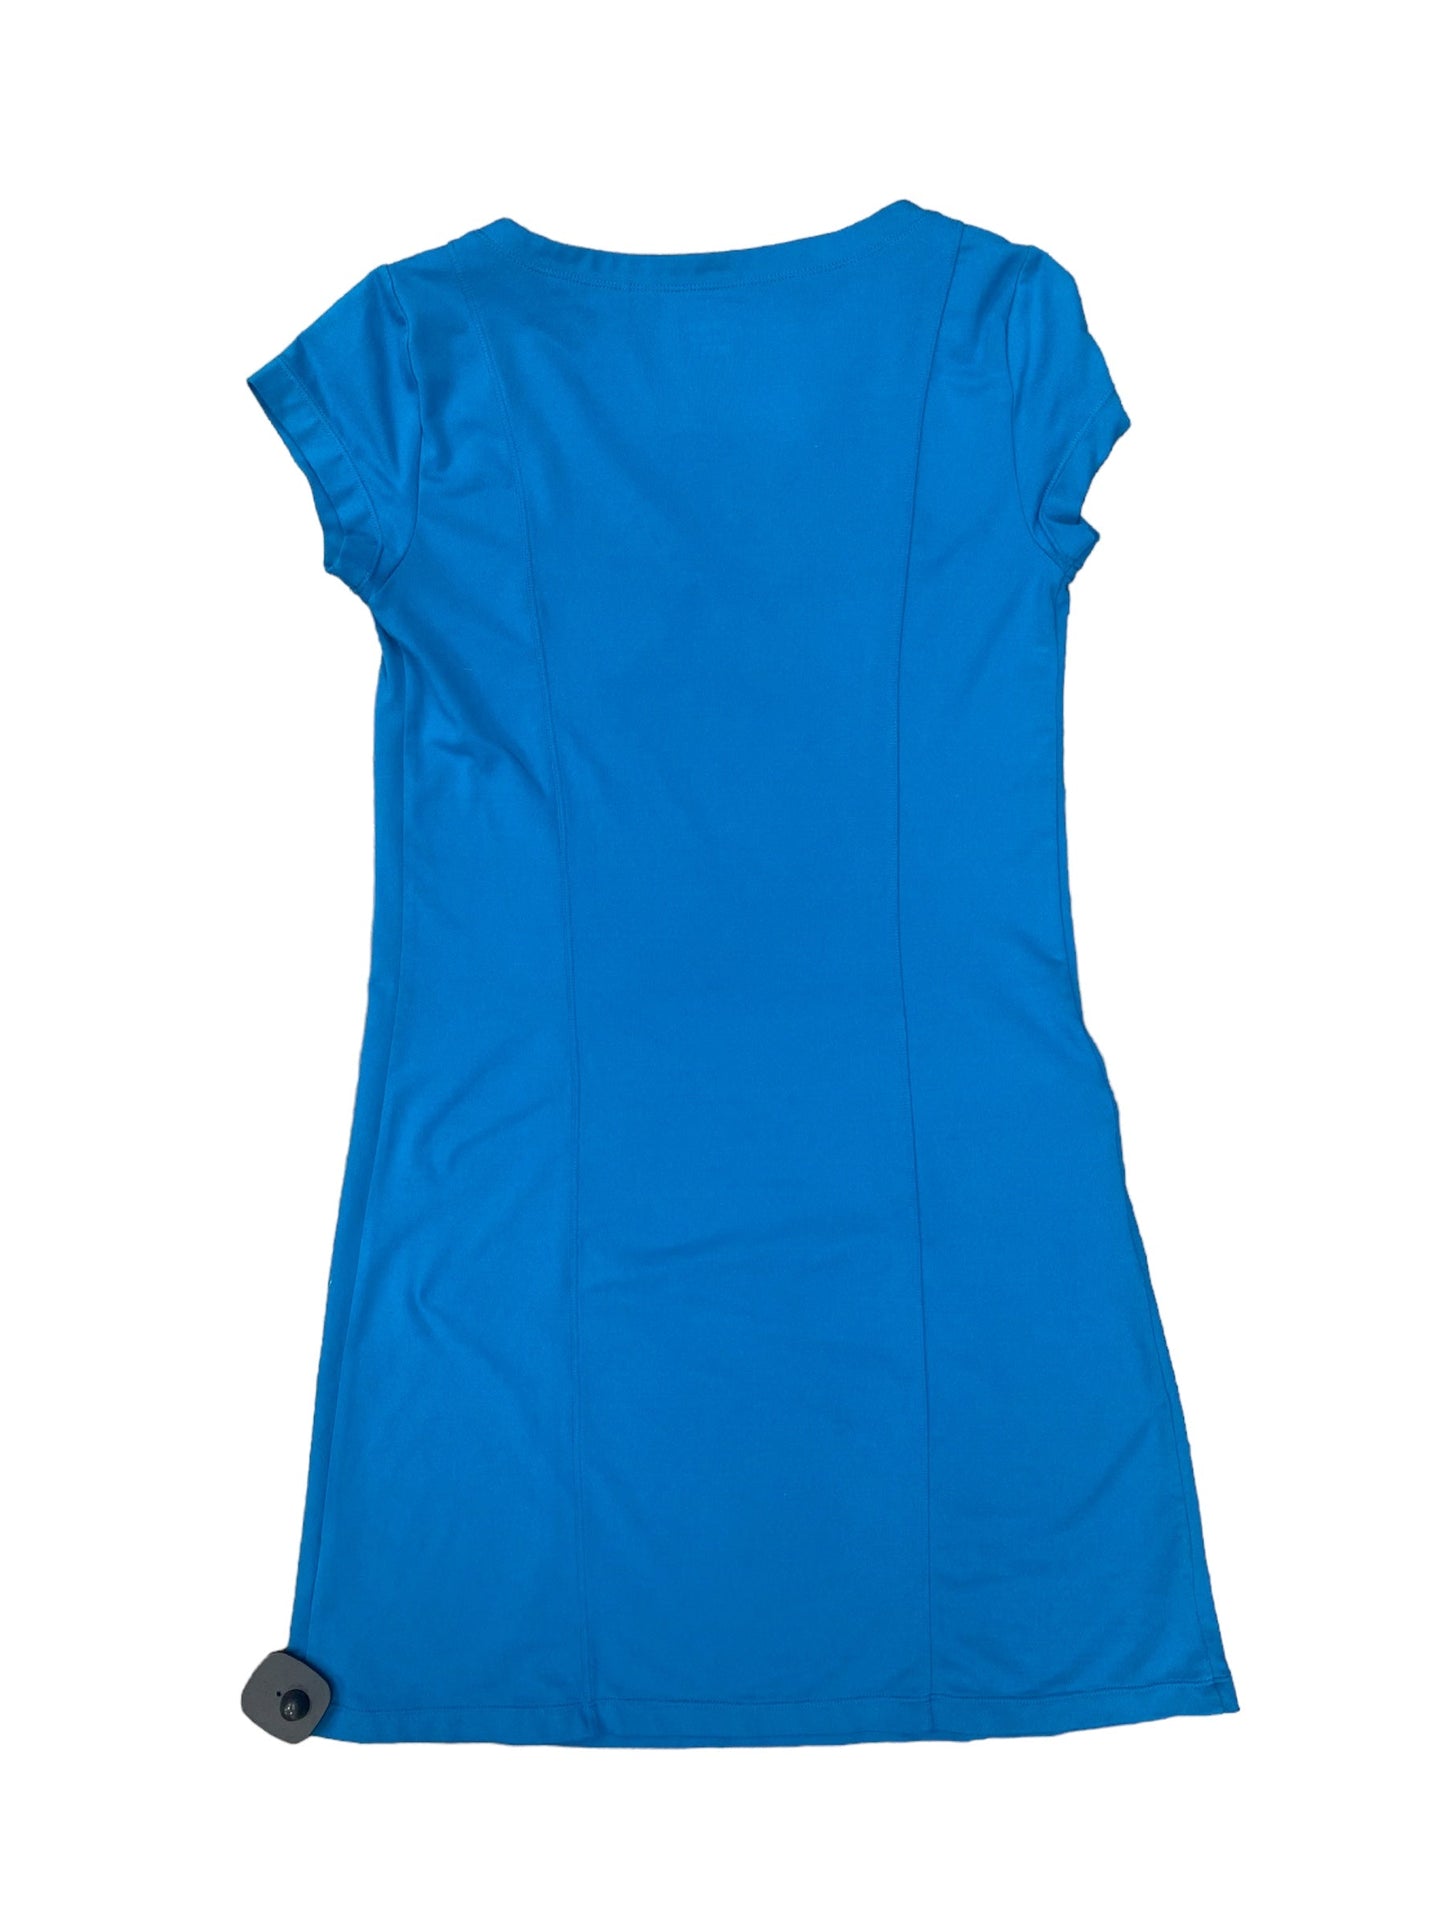 Athletic Dress By Toad & Co  Size: Xs